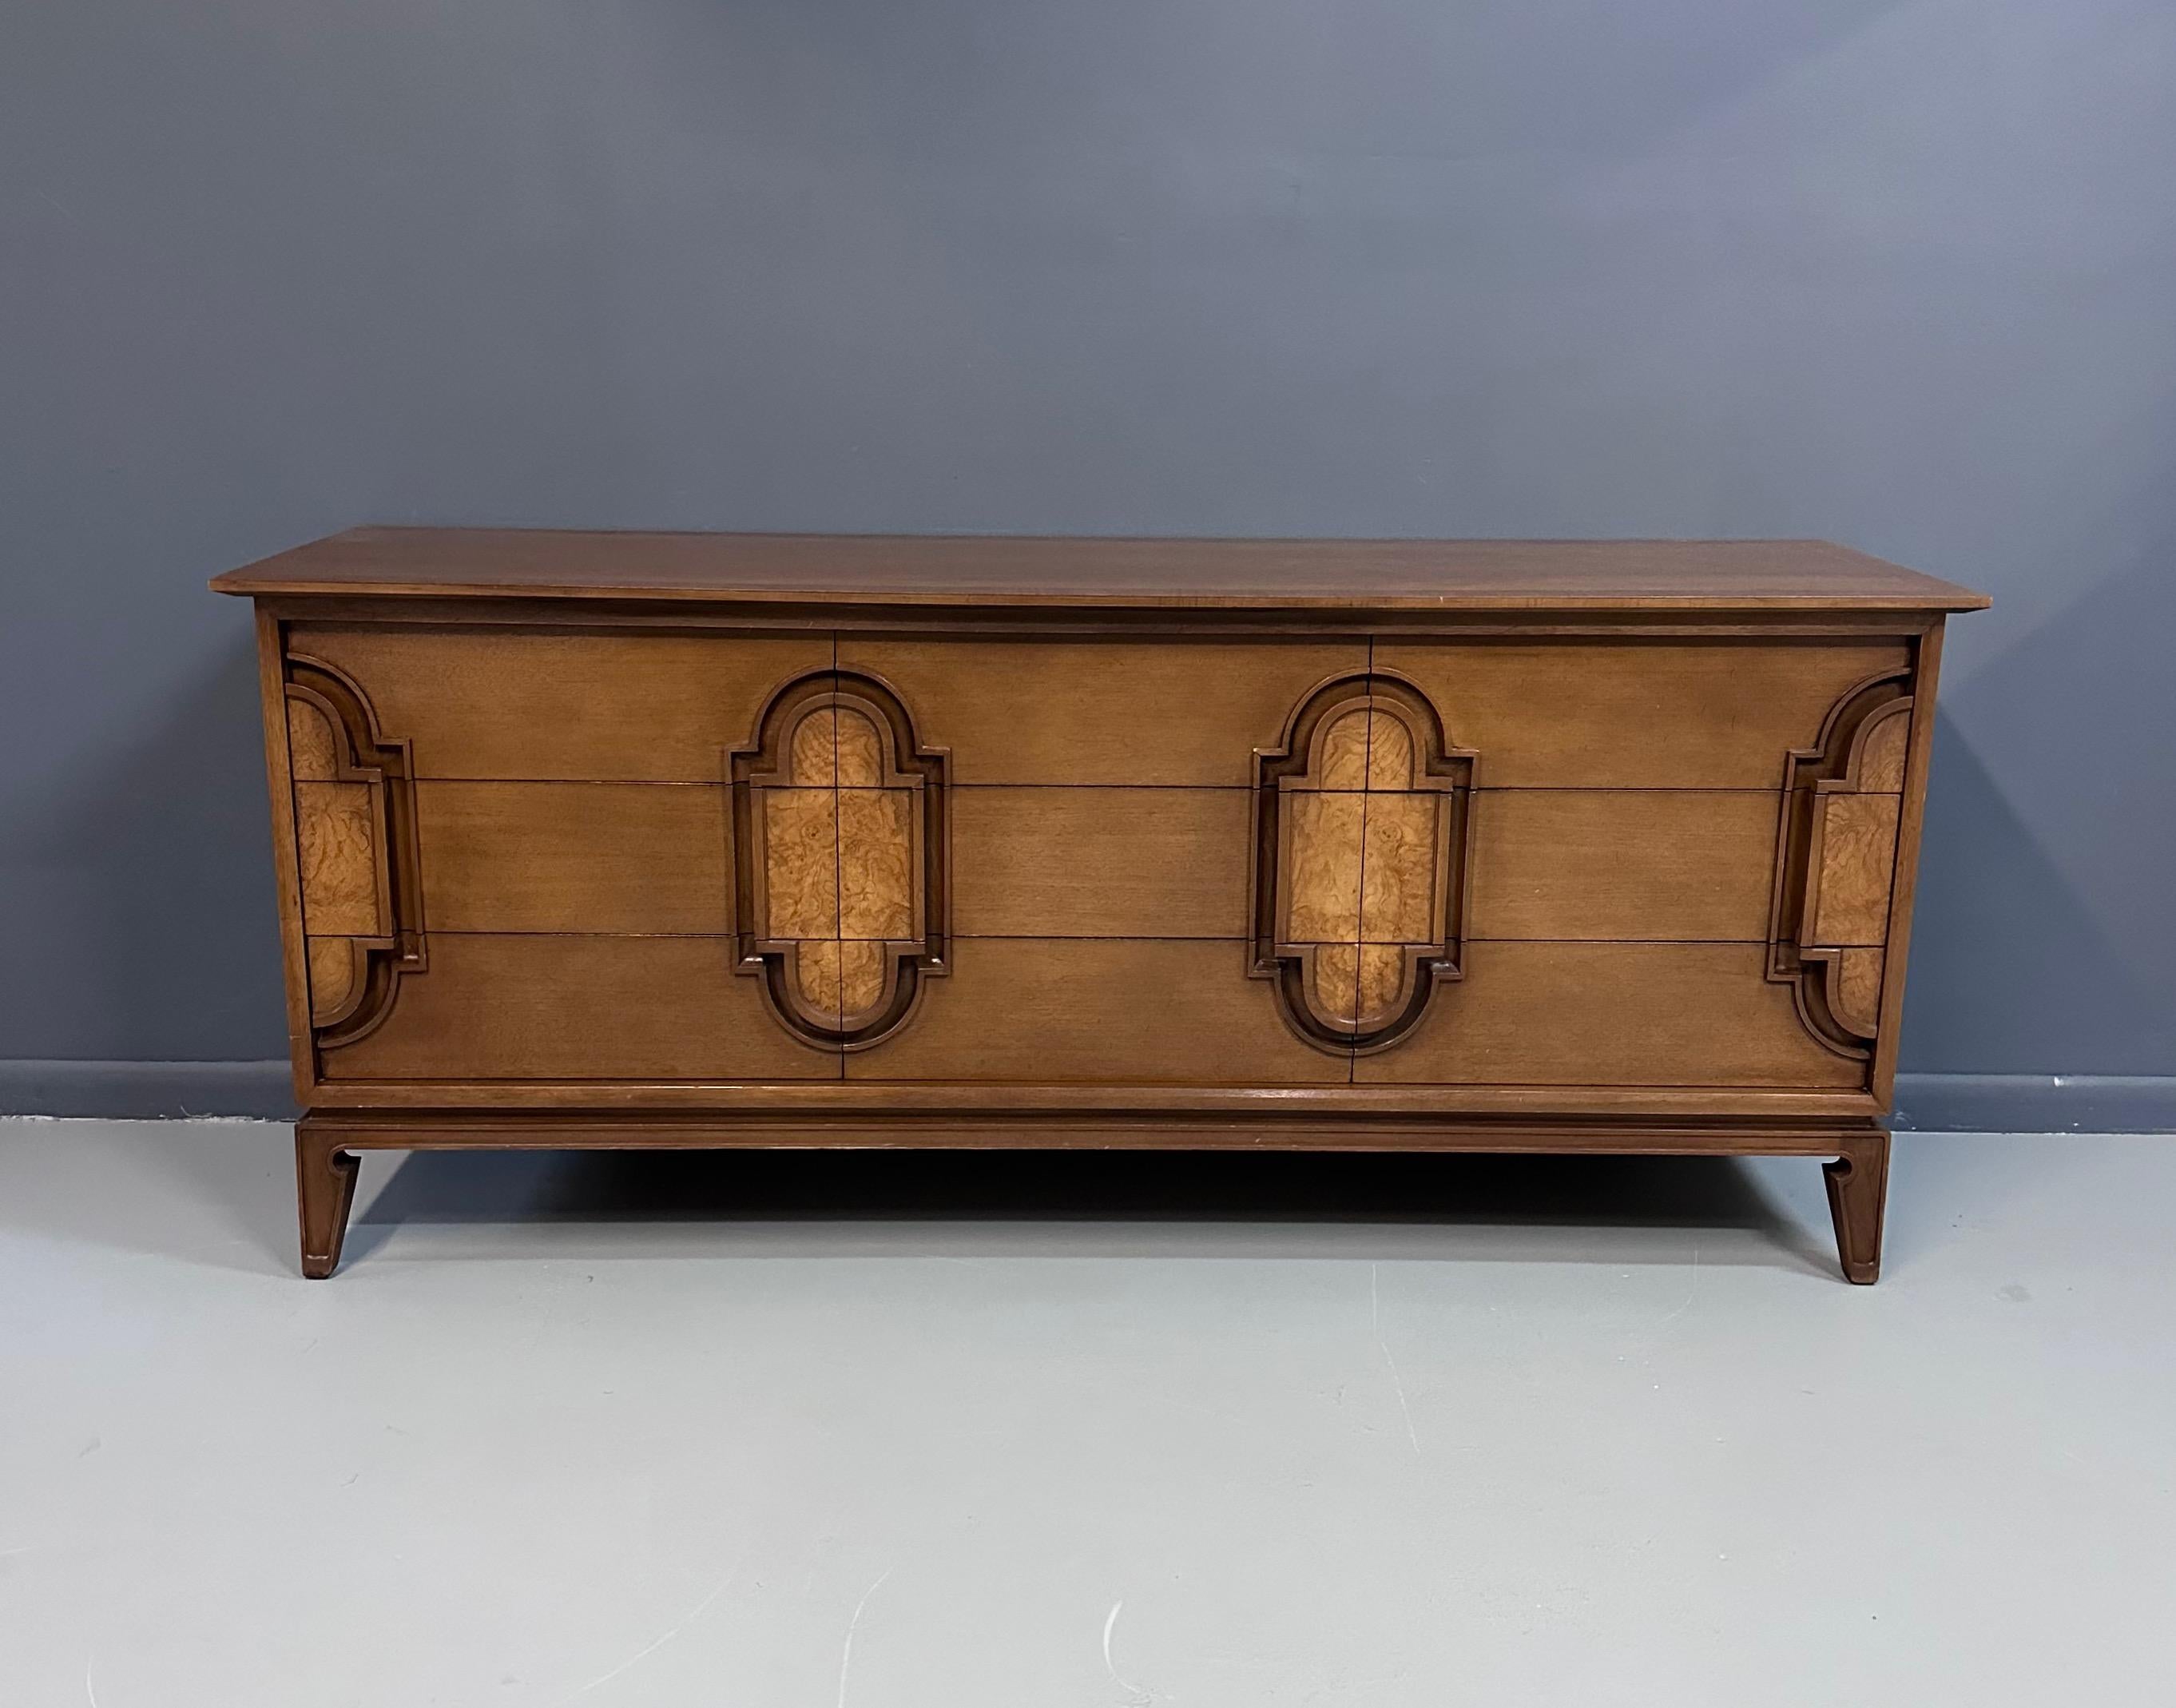 Romweber substantial nine drawer dresser in fruitwood with lovely burl accents. This dresser has generous drawers with a tray in a top drawer for your accoutrement.